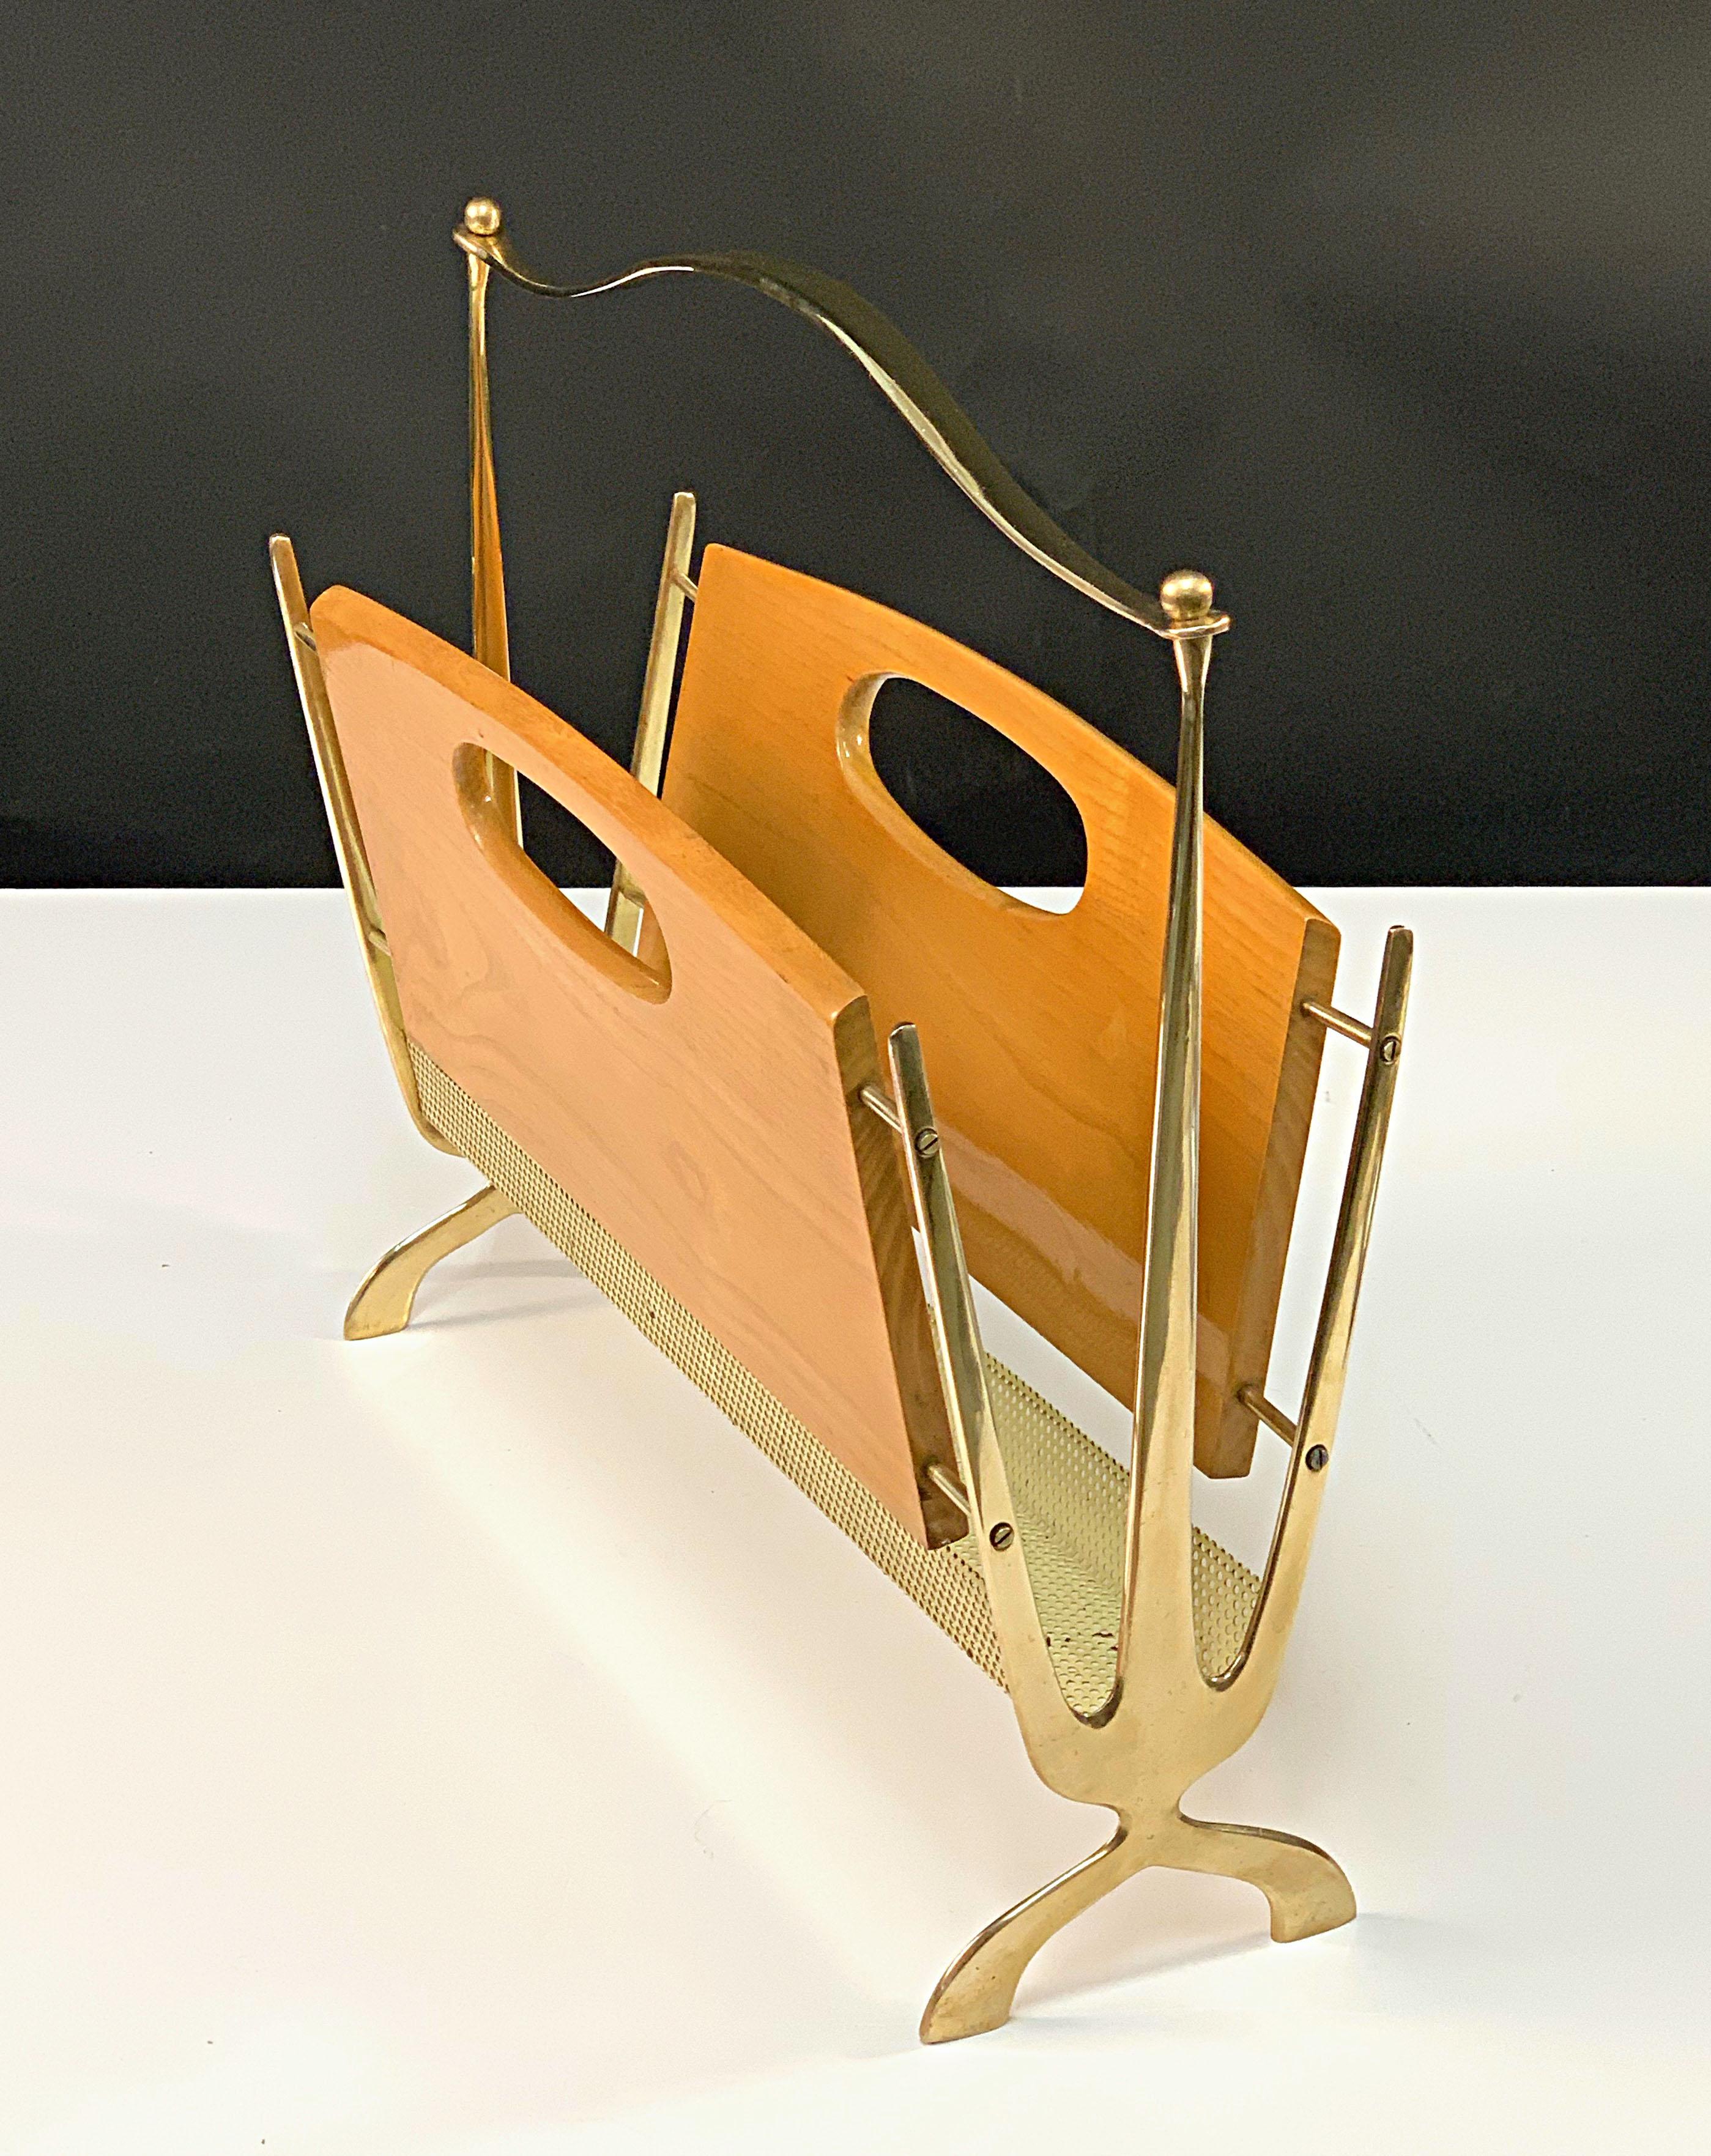 Maison Baguès Midcentury Brass and Chestnut Wood French Magazine Rack, 1950s For Sale 2